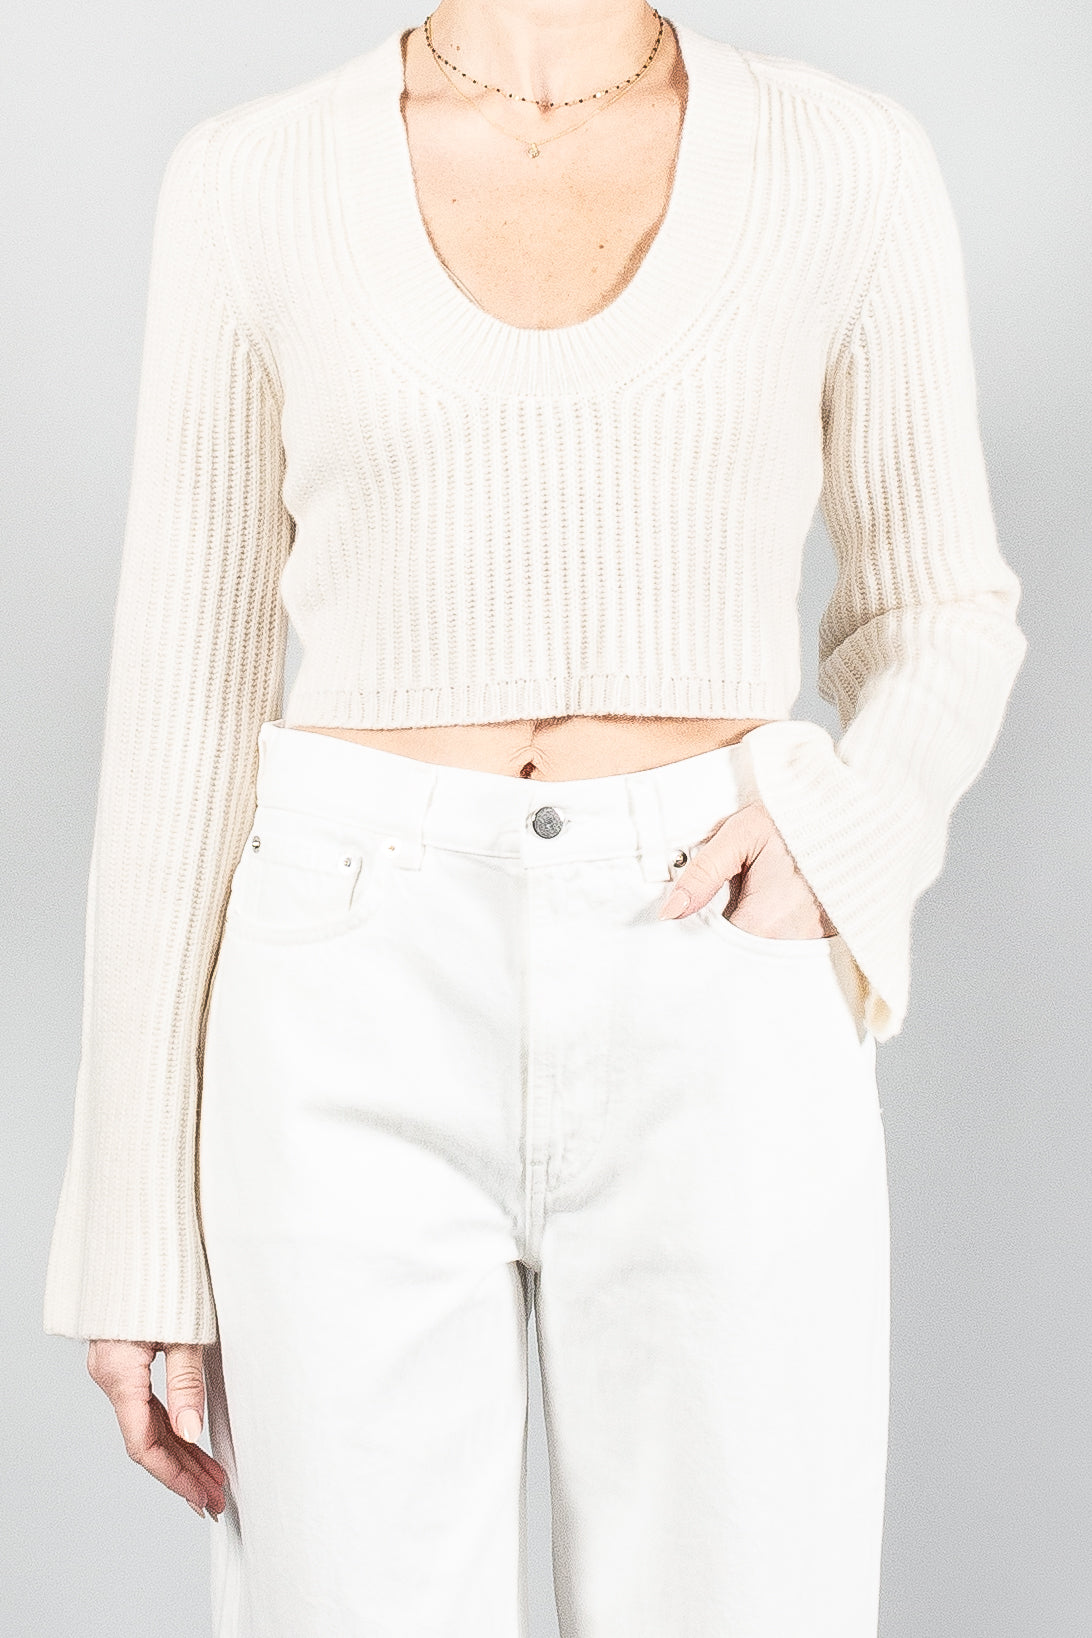 Loulou Studio Chante Sweater-Knitwear-Misch-Boutique-Vancouver-Canada-misch.ca